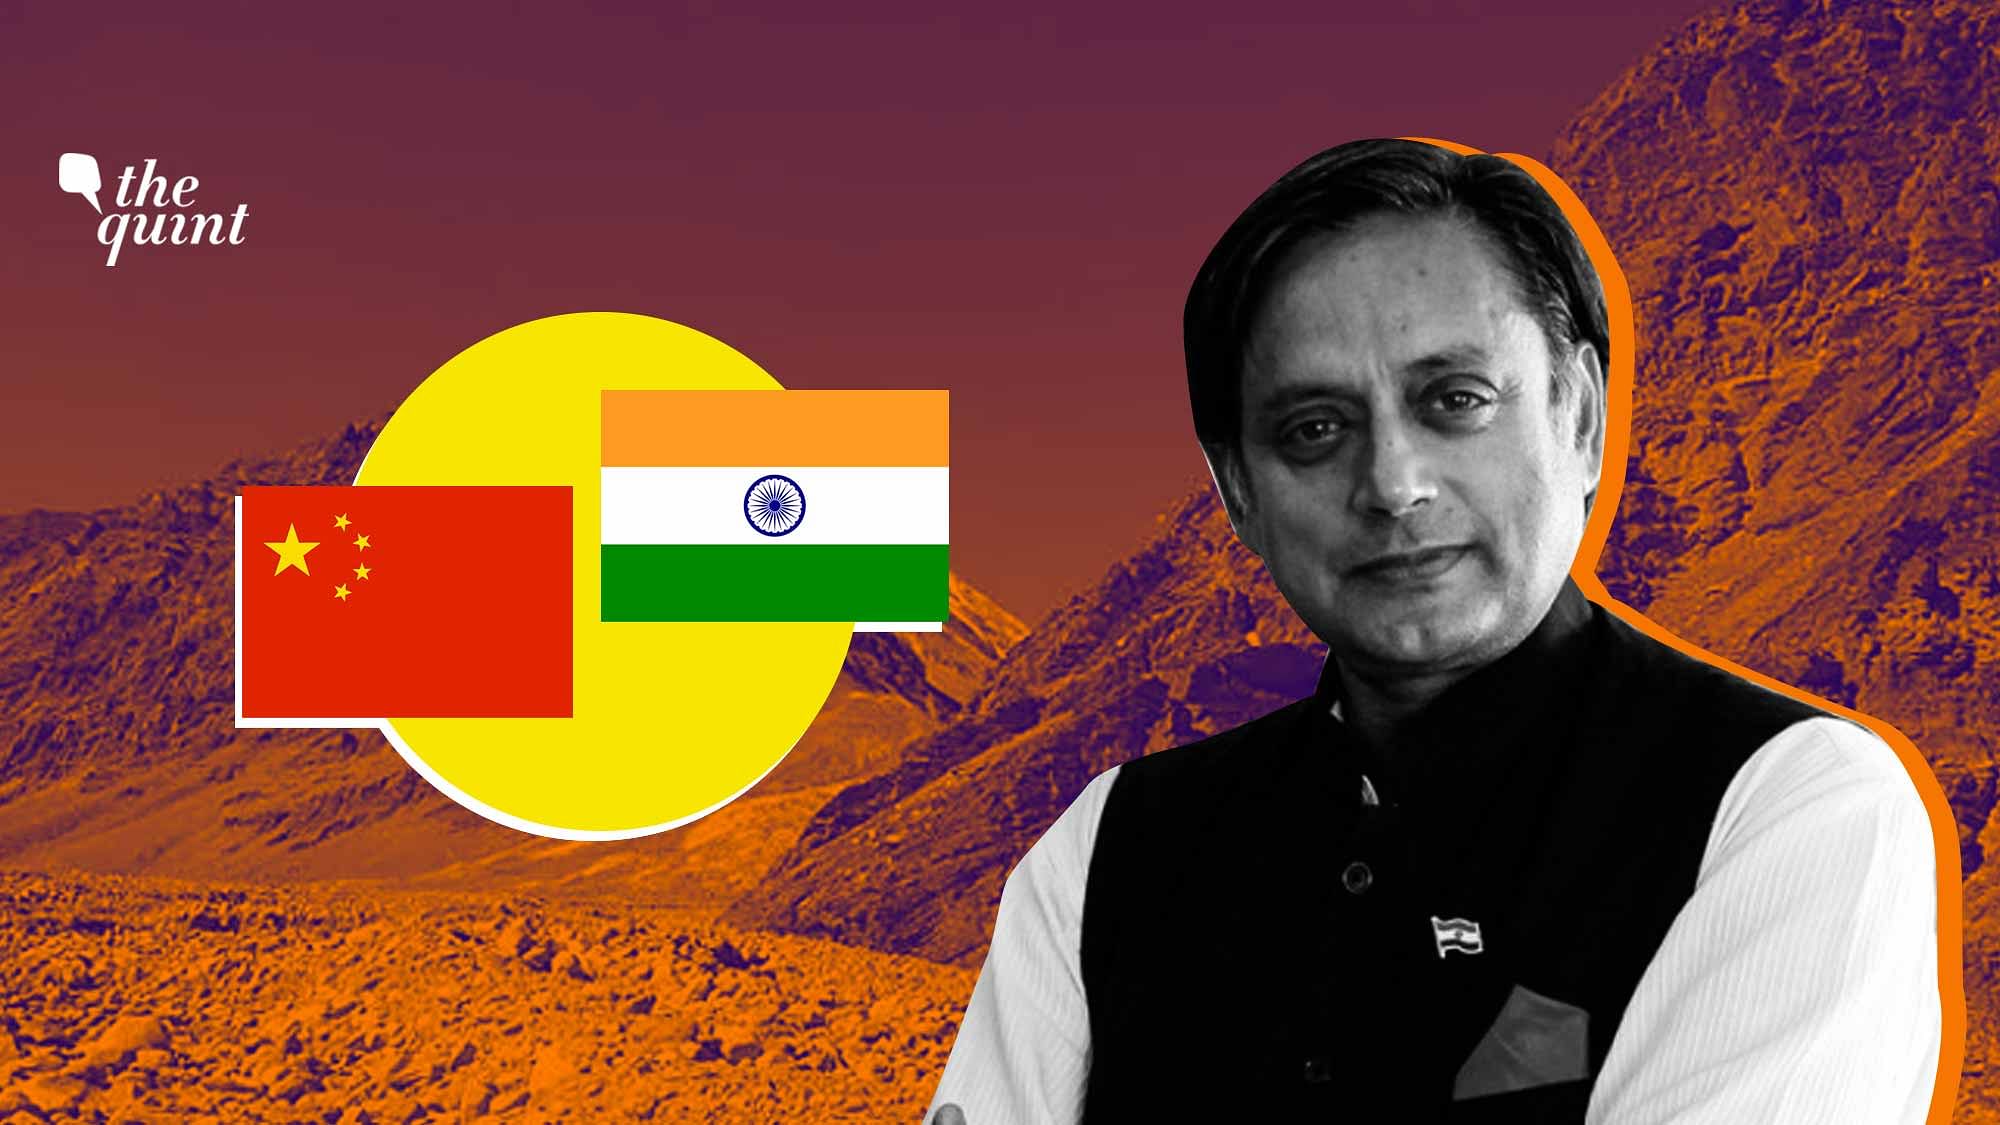 On Modi’s comments, Tharoor said that they imply he has “meekly” accepted the “new reality”, which is a “setback”.